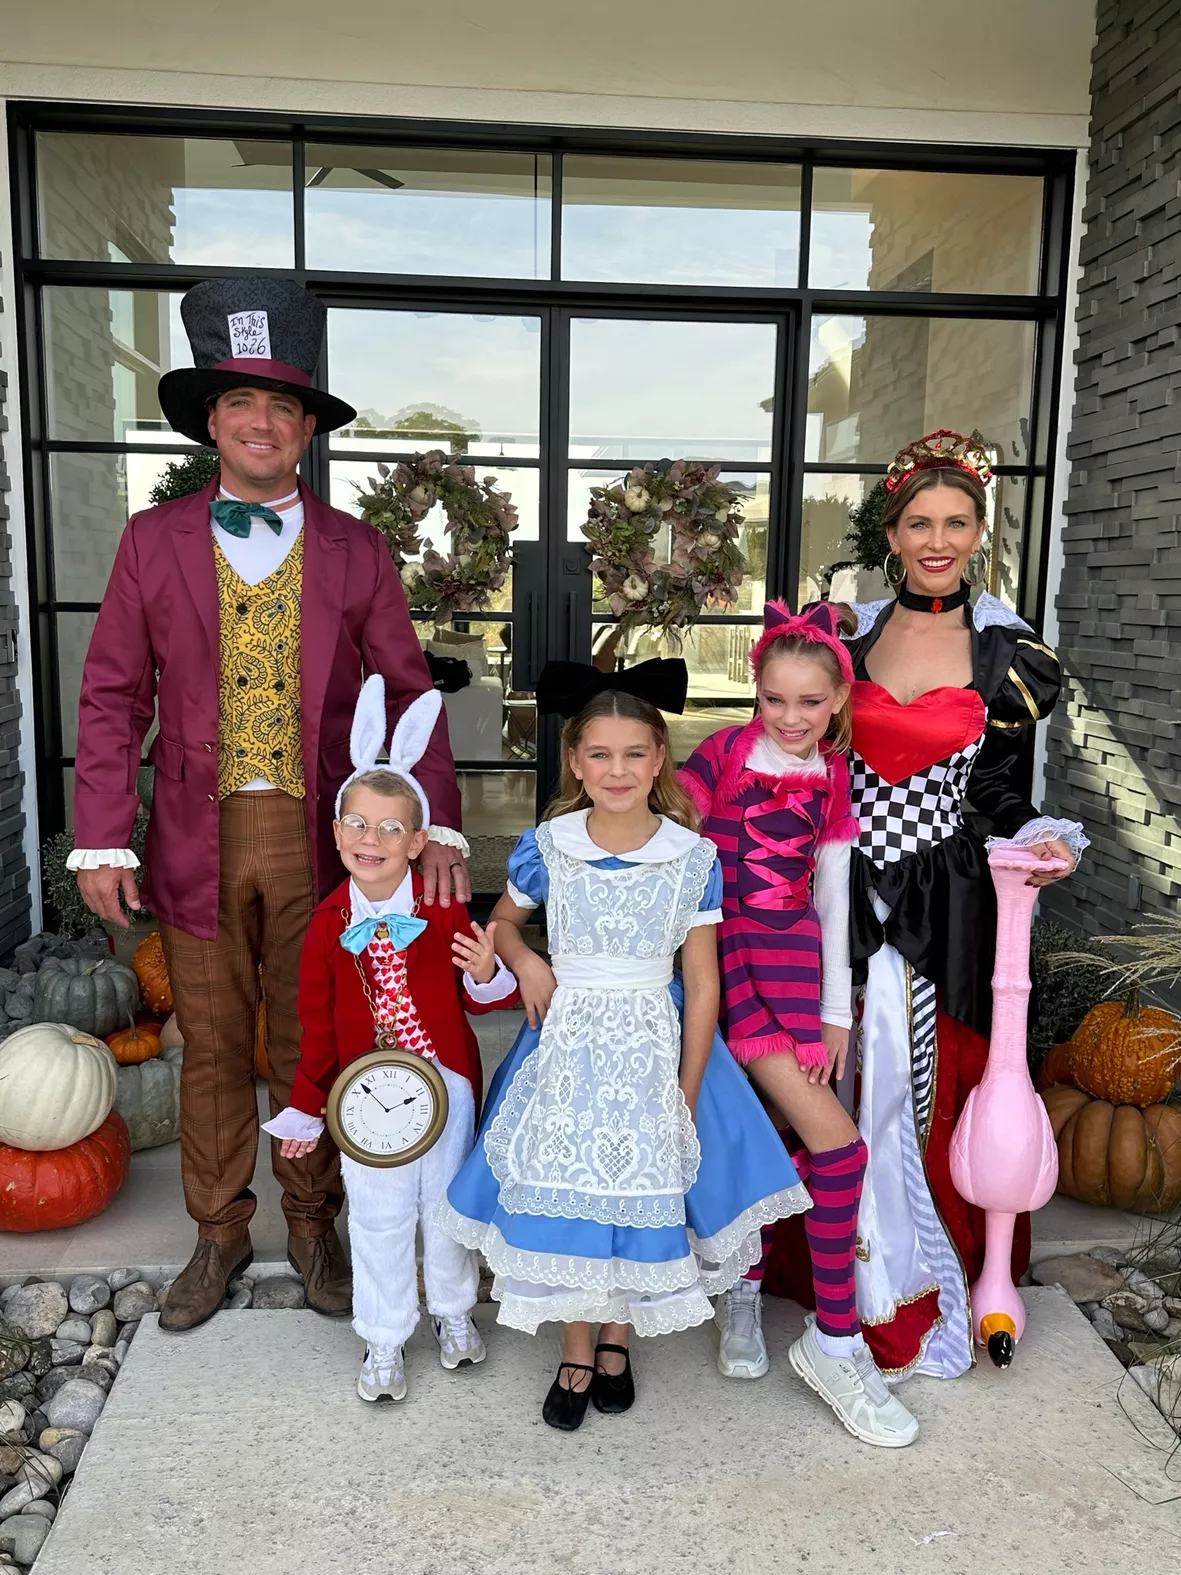 DIY Queen of Hearts and Mad Hatter Alice and Wonderland Costumes